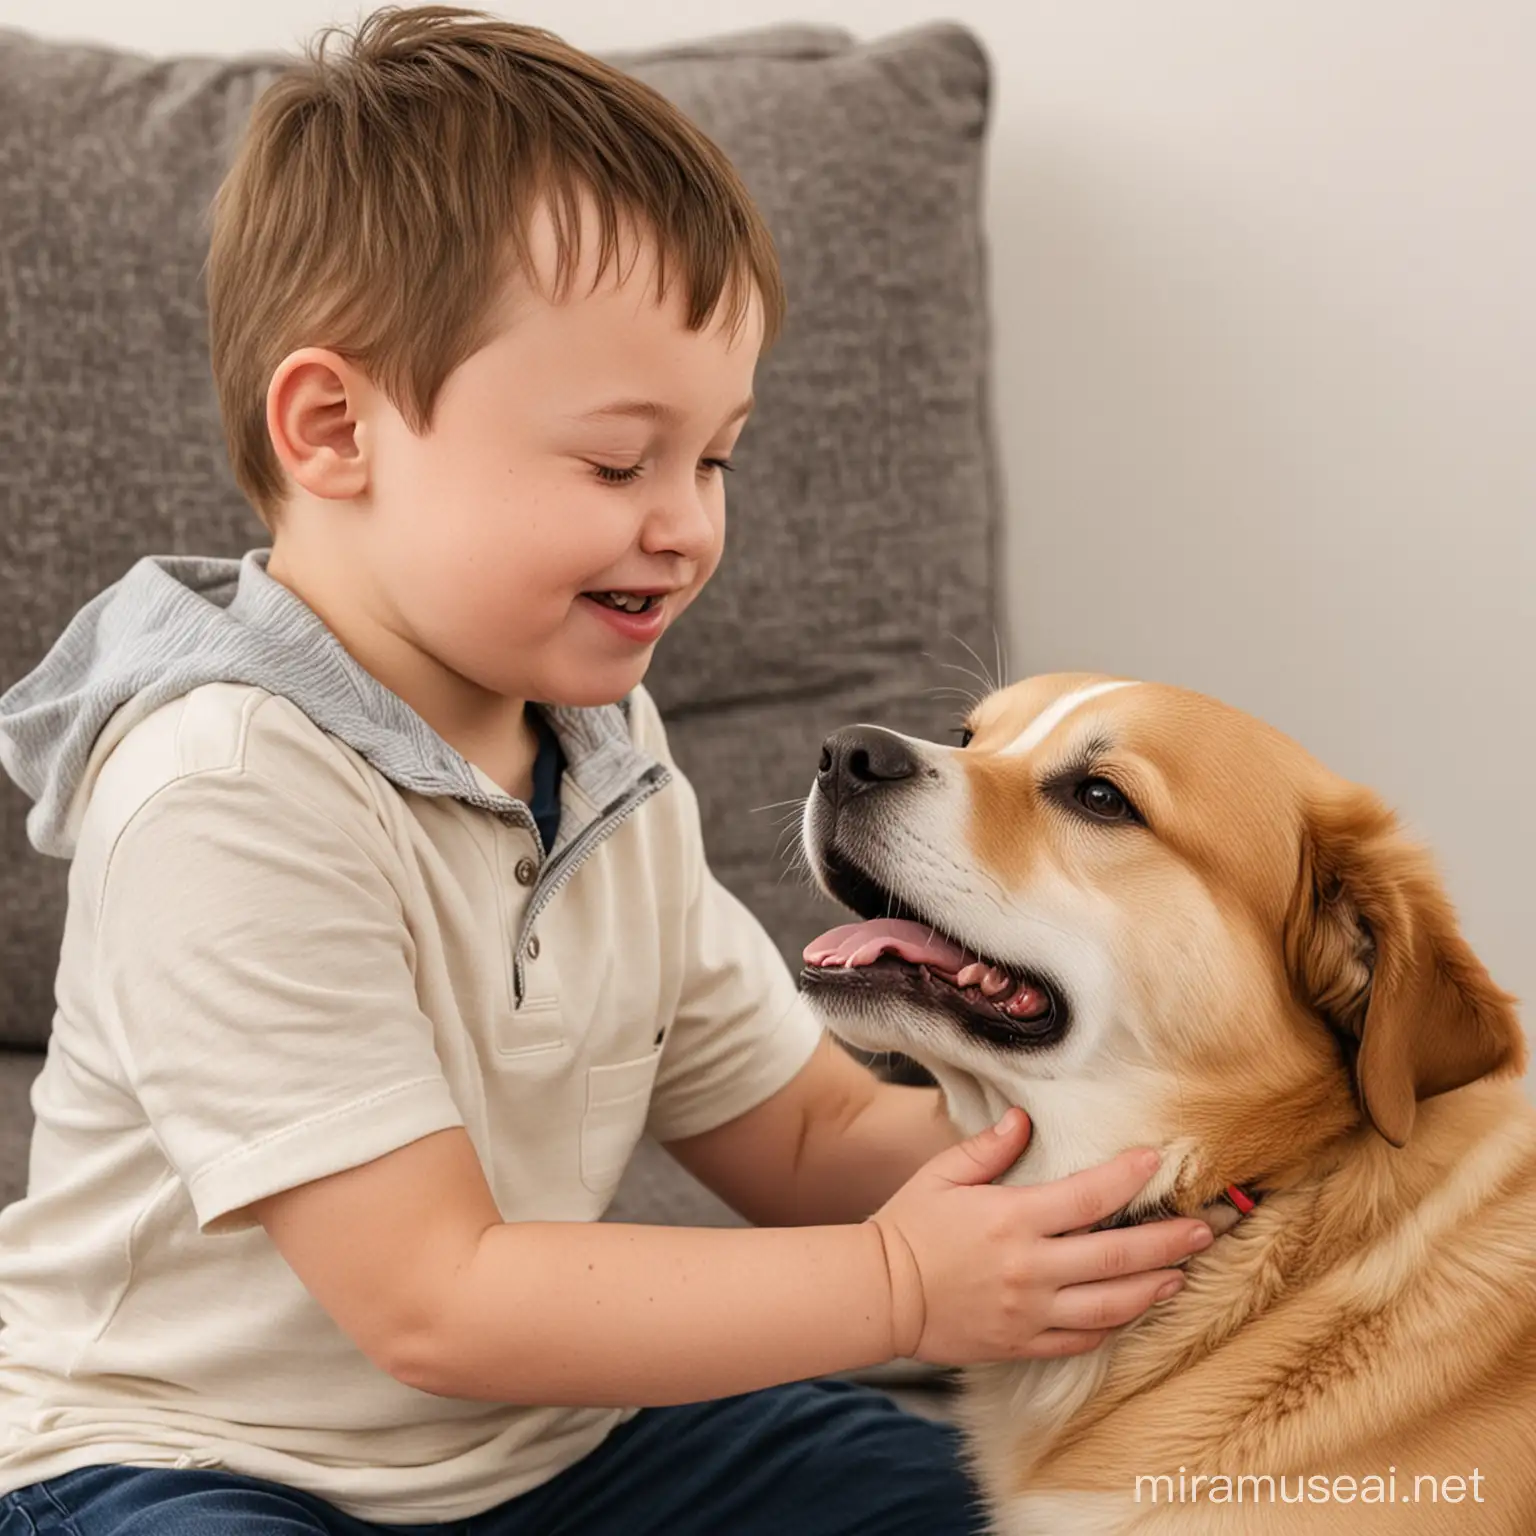 a boy with down syndrome petting a dog